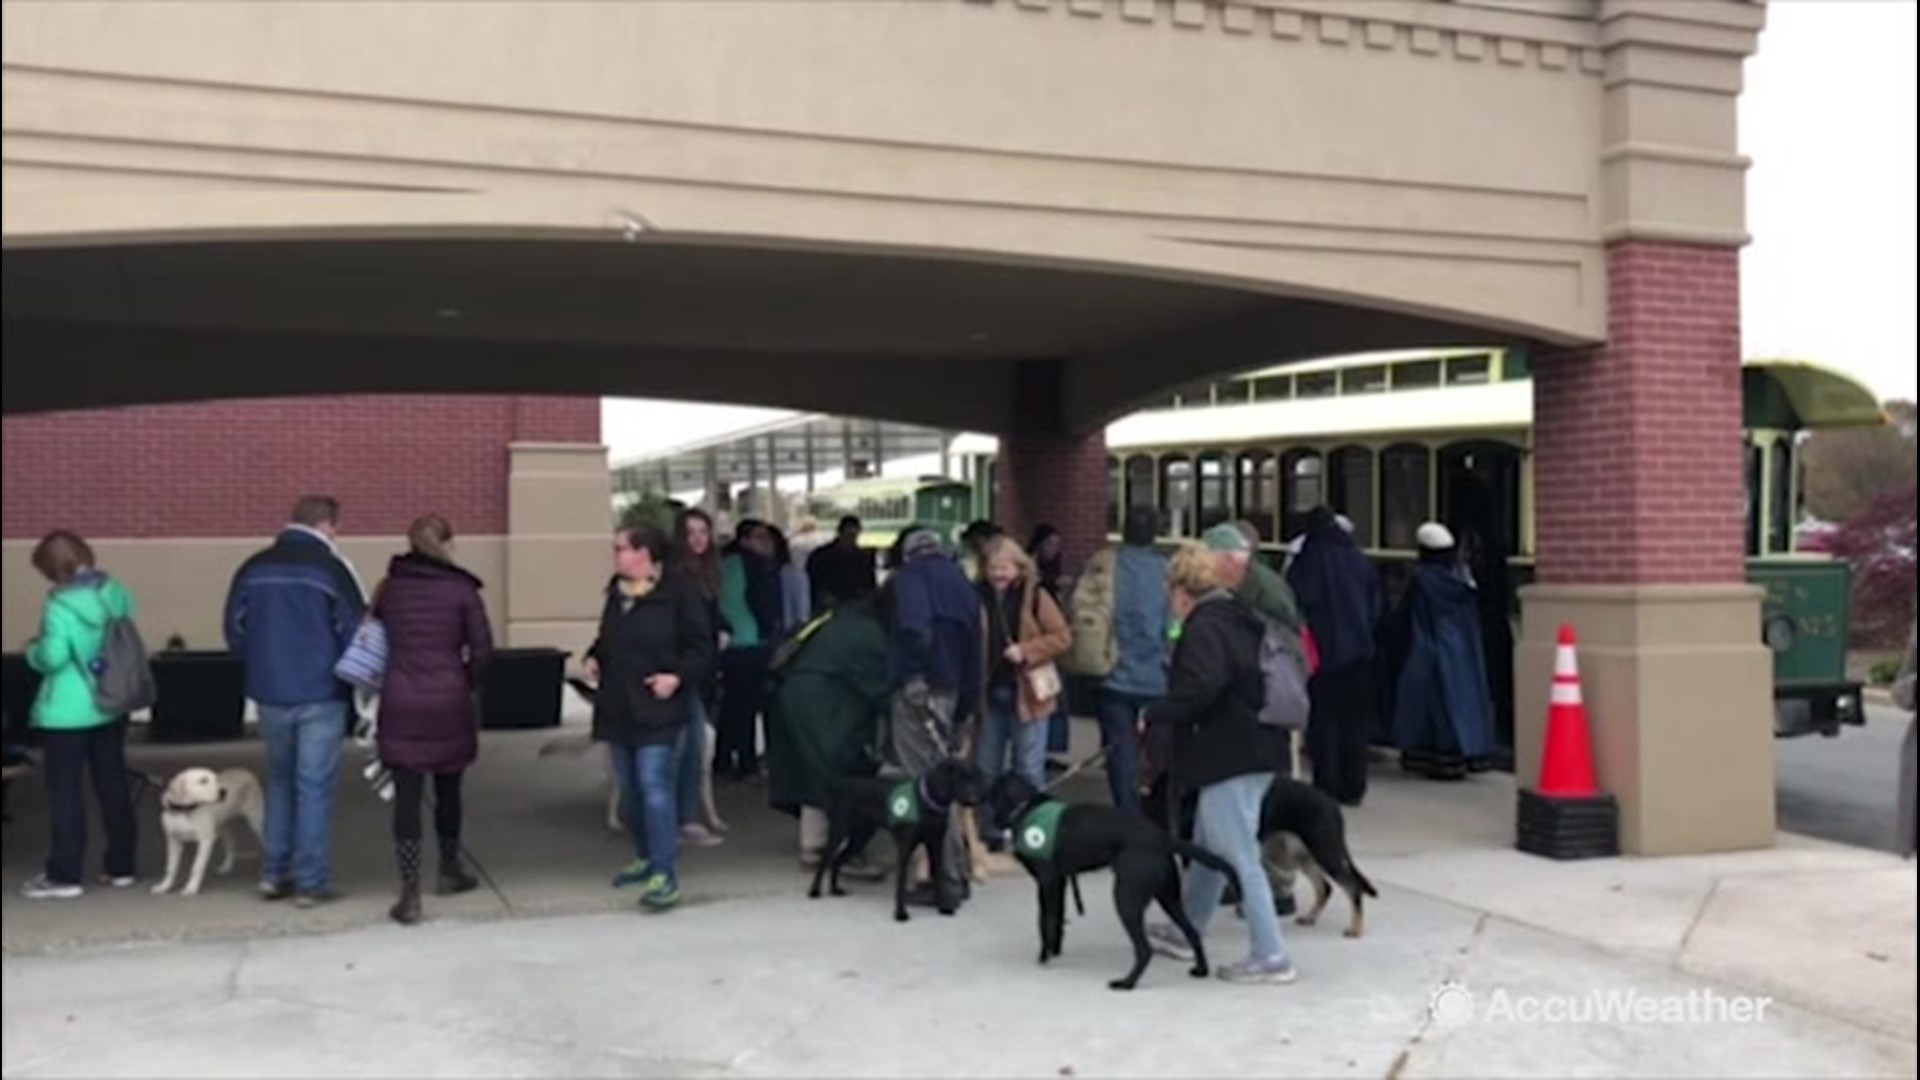 Service dogs of all sorts traveled to Hershey, Pennsylvania, on Nov. 17 to practice being around children in the cold. The trip also helped train the animals on how to identify the smell of chocolate.